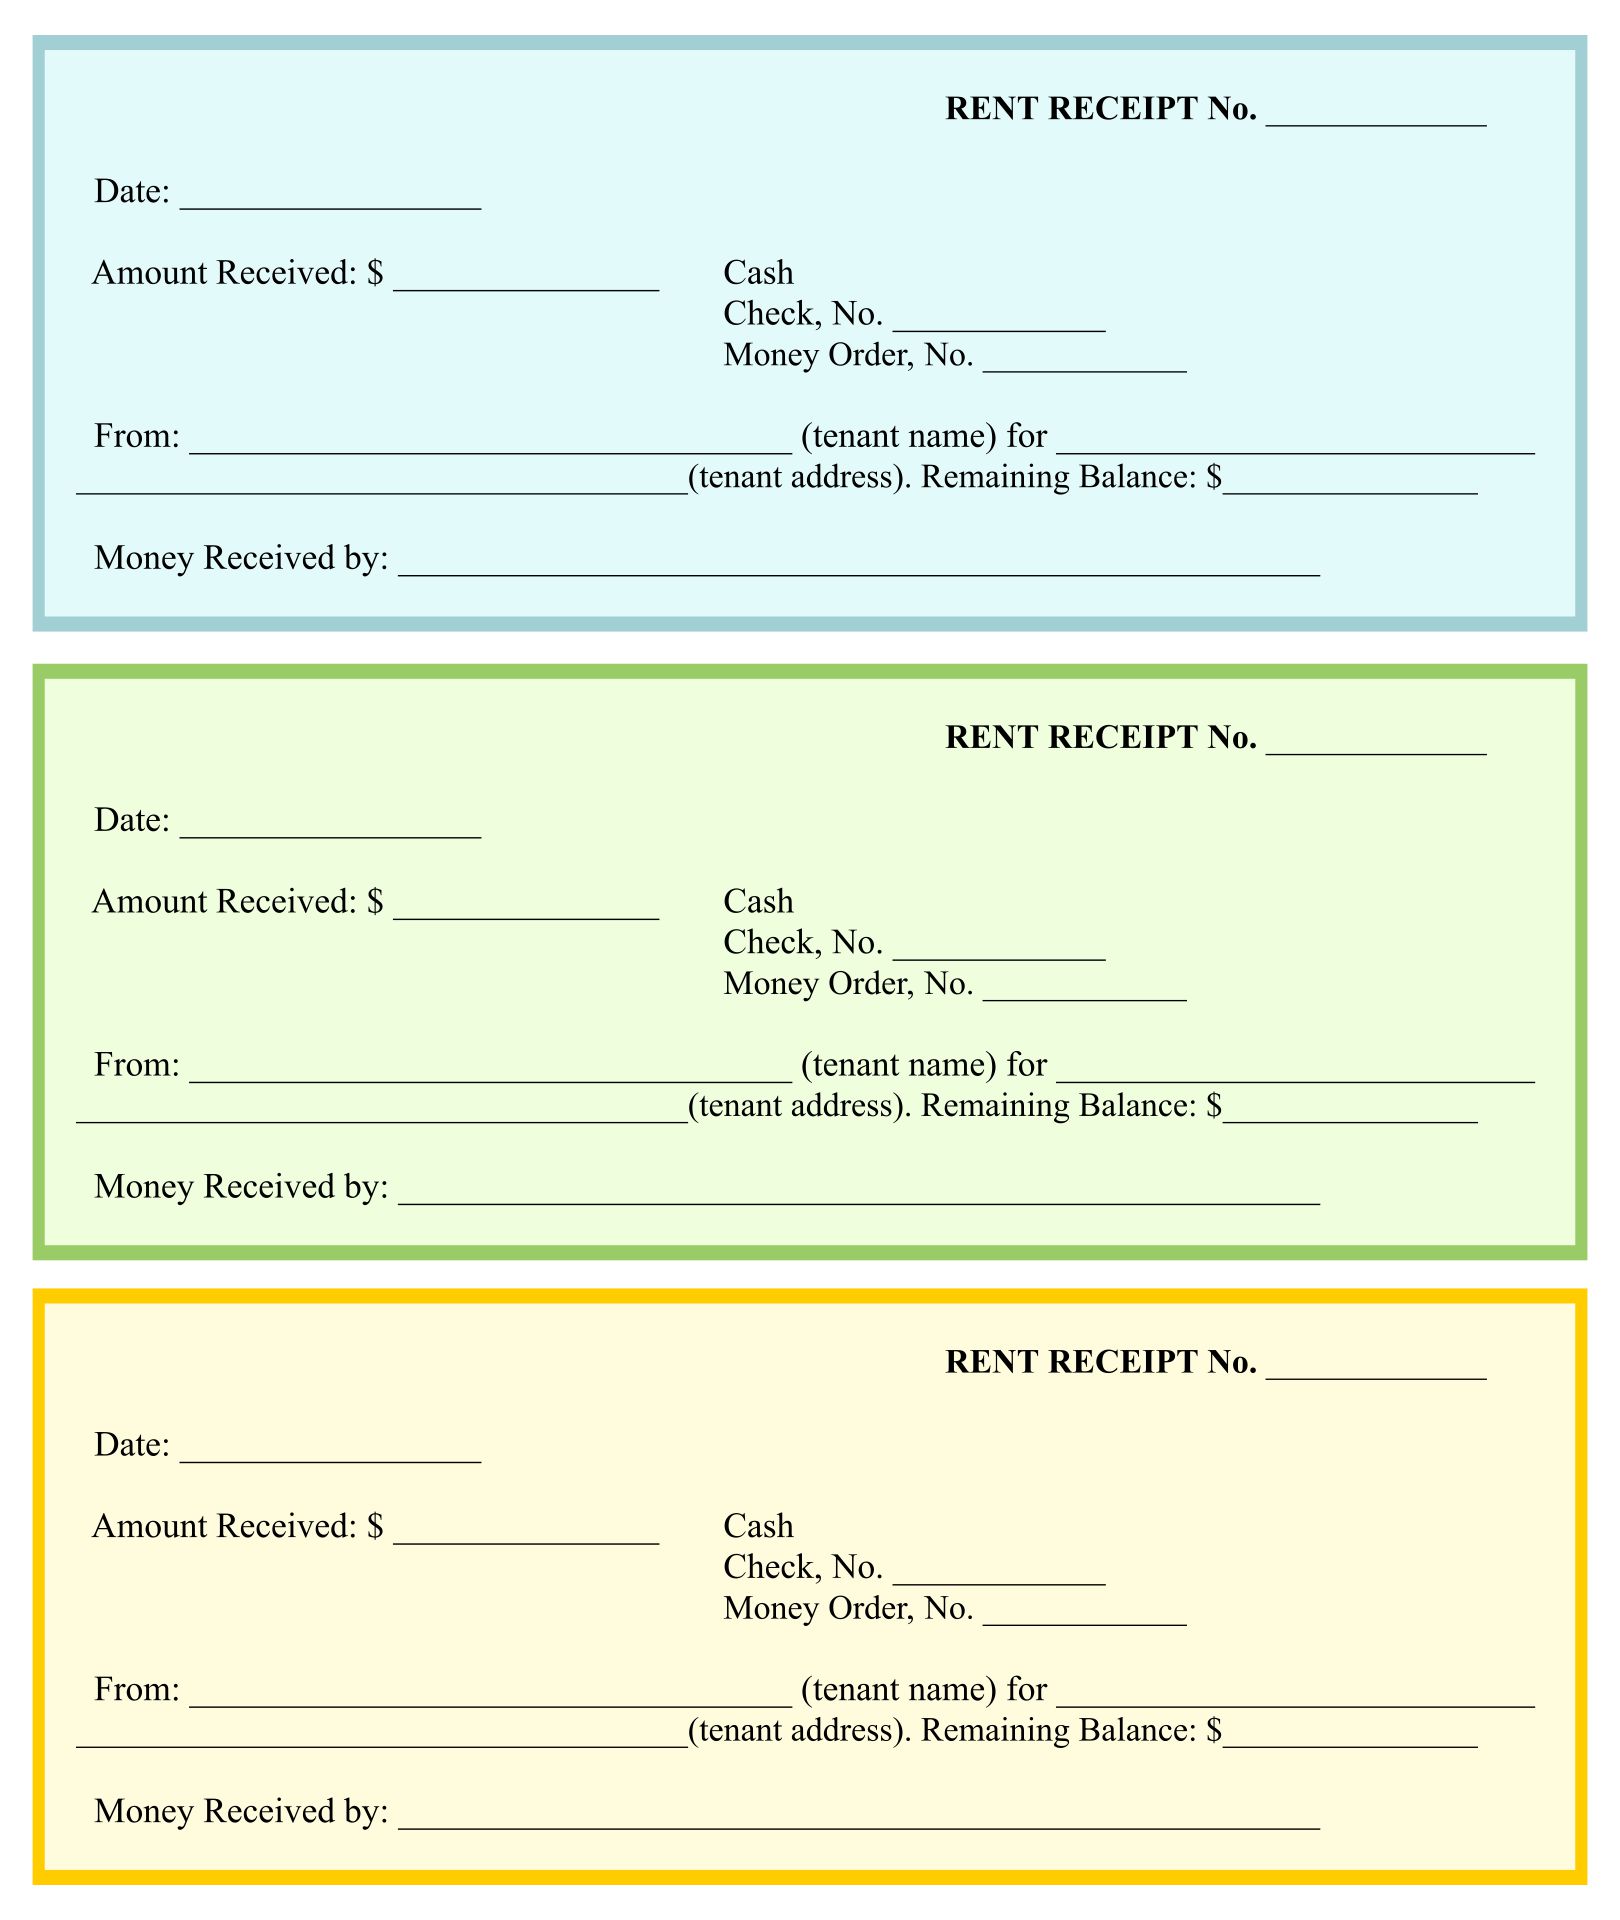 Printable Blank Receipt Form Template Free Download